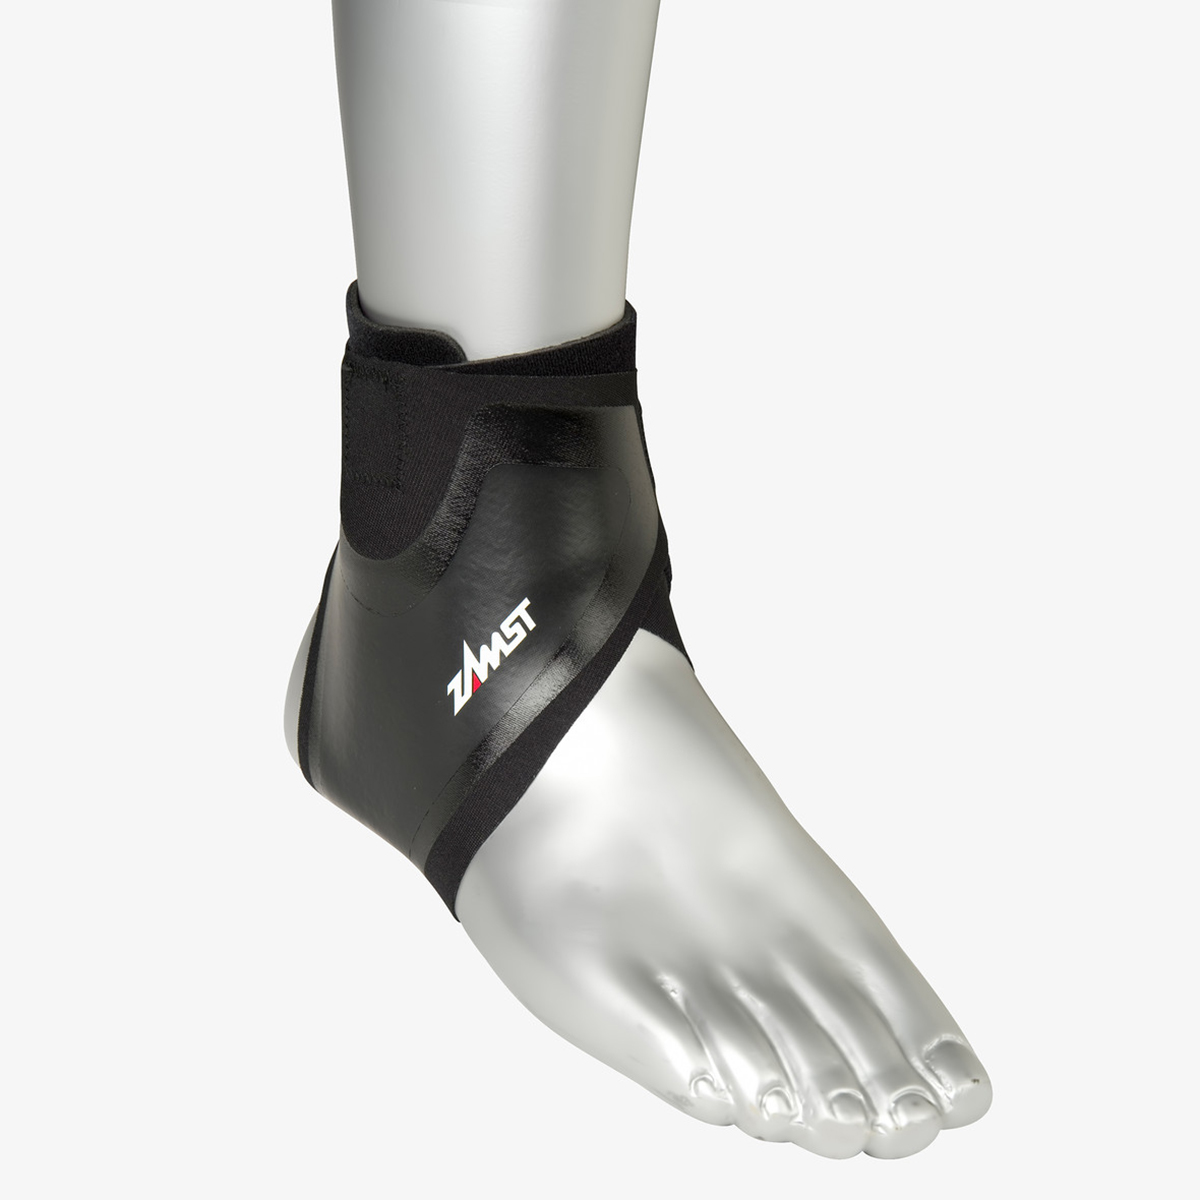 Zamst Filmista Ankle Support, , large image number null